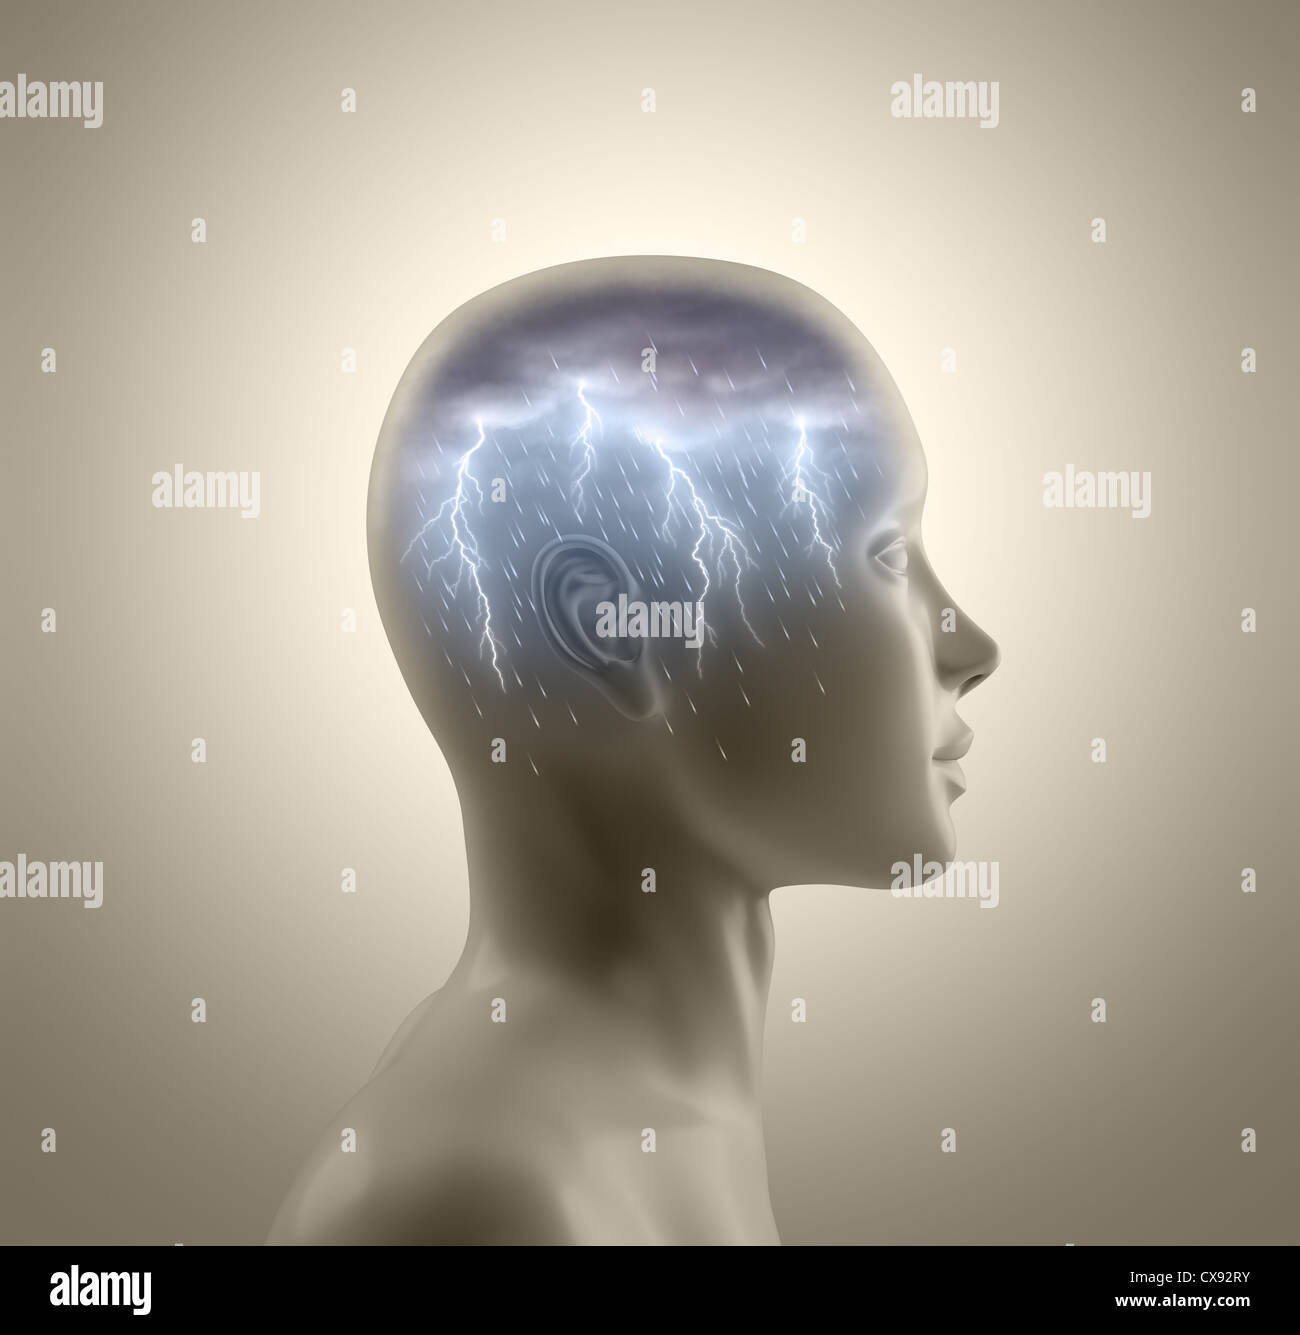 Storm inside the head. Lightning and rain falls from the clouds symbolizing the concept of brainstorm. Stock Photo